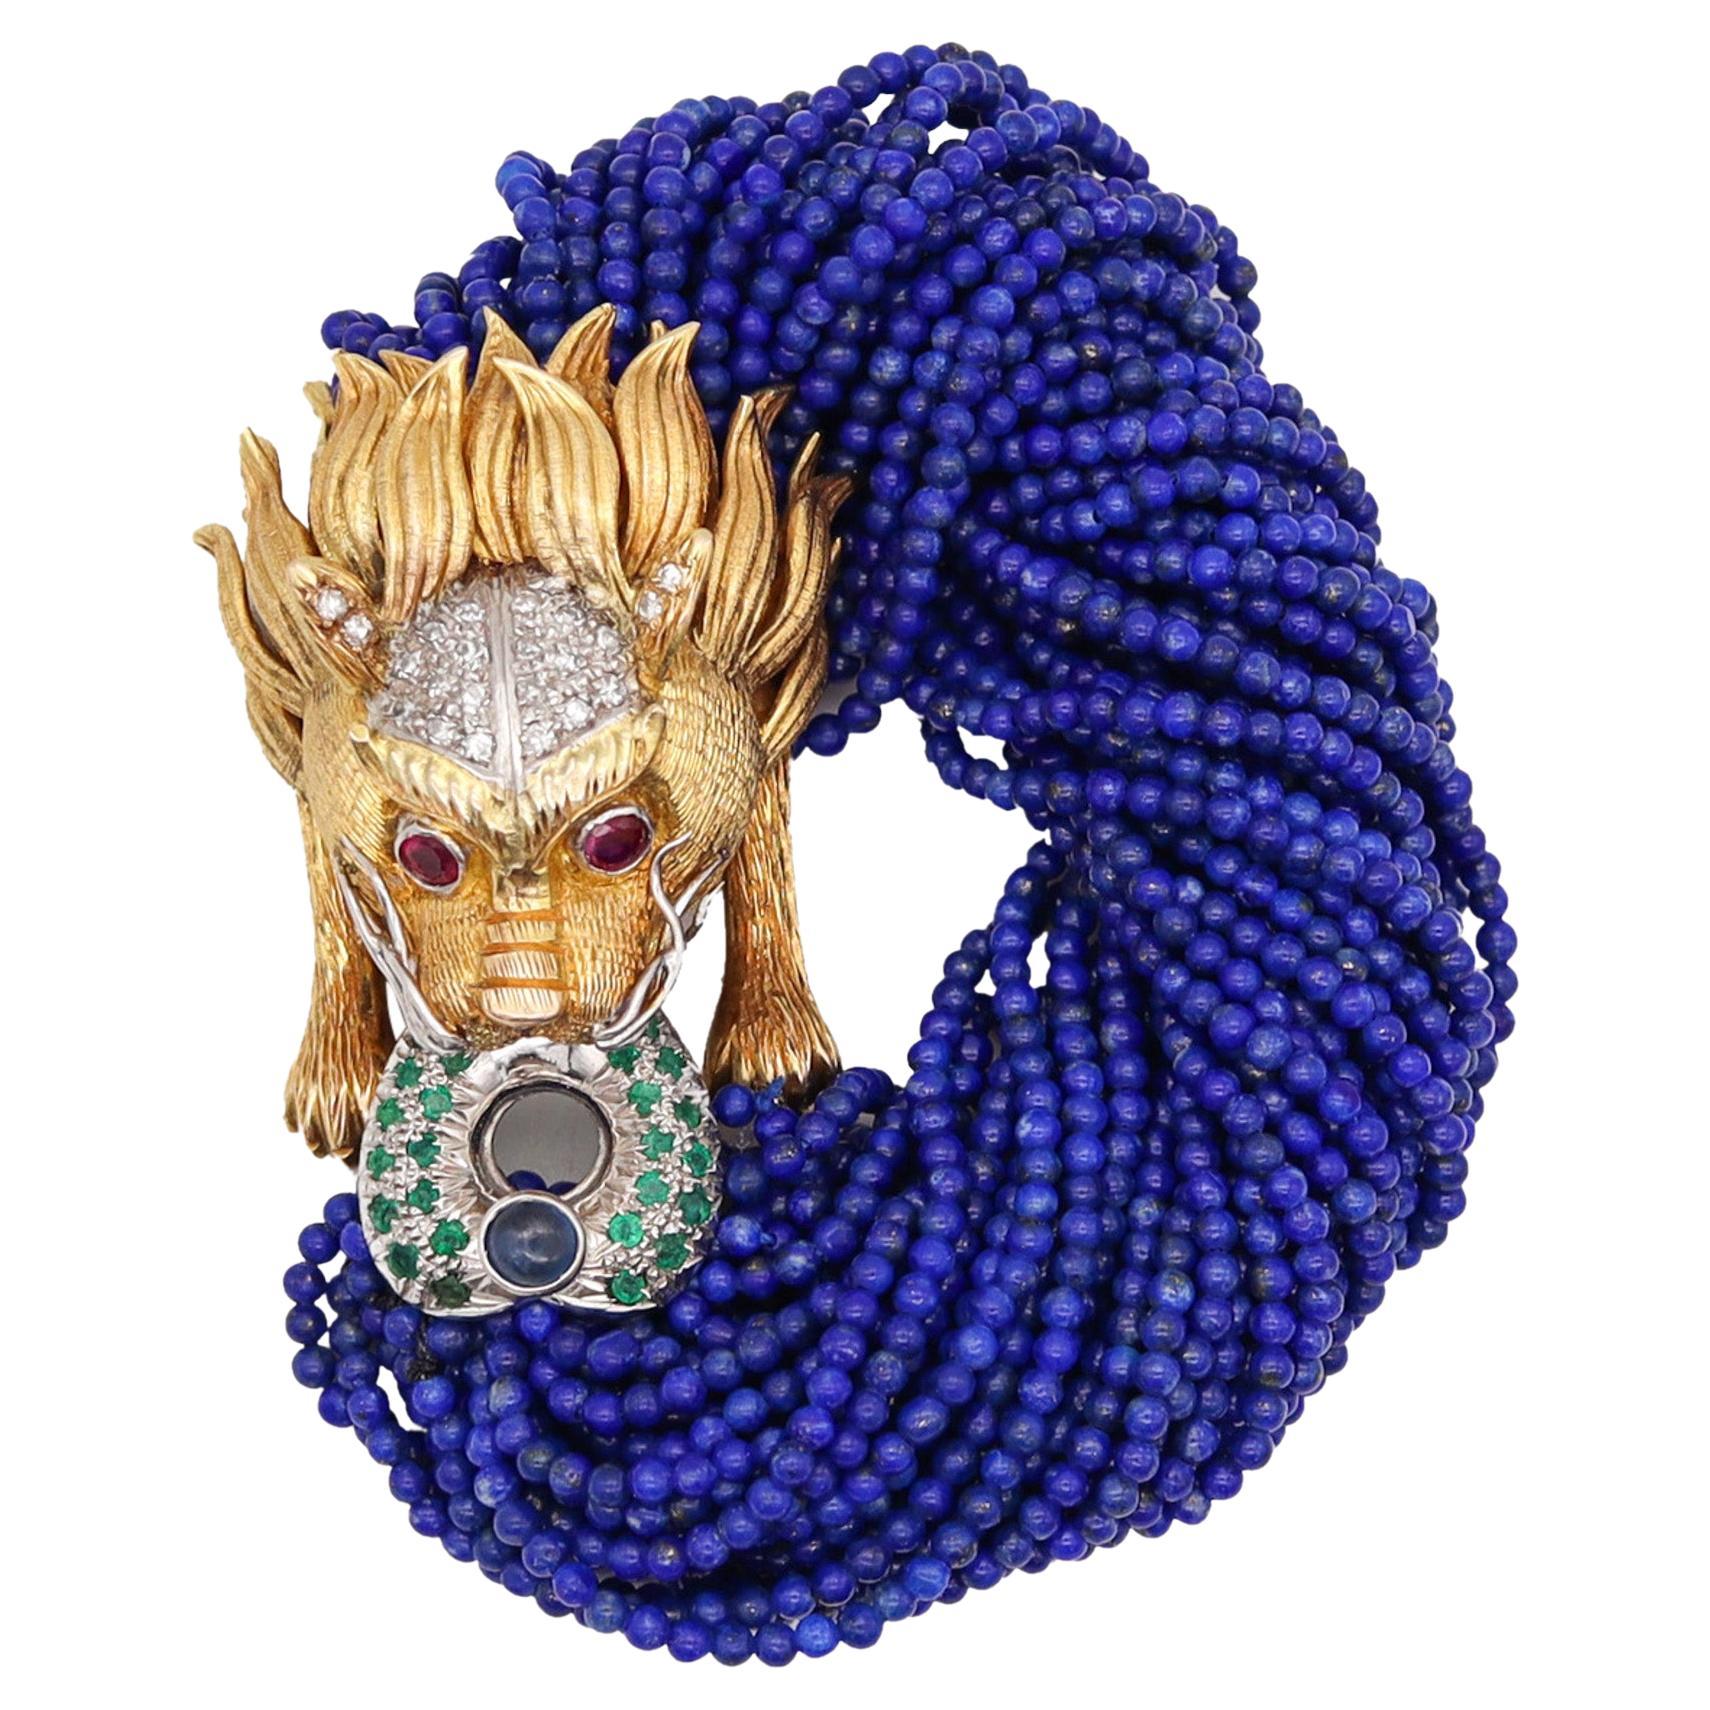 Chinoiserie Lapis Bracelet In 18Kt Gold With 2.17 Ctw Diamonds Emeralds & Rubies